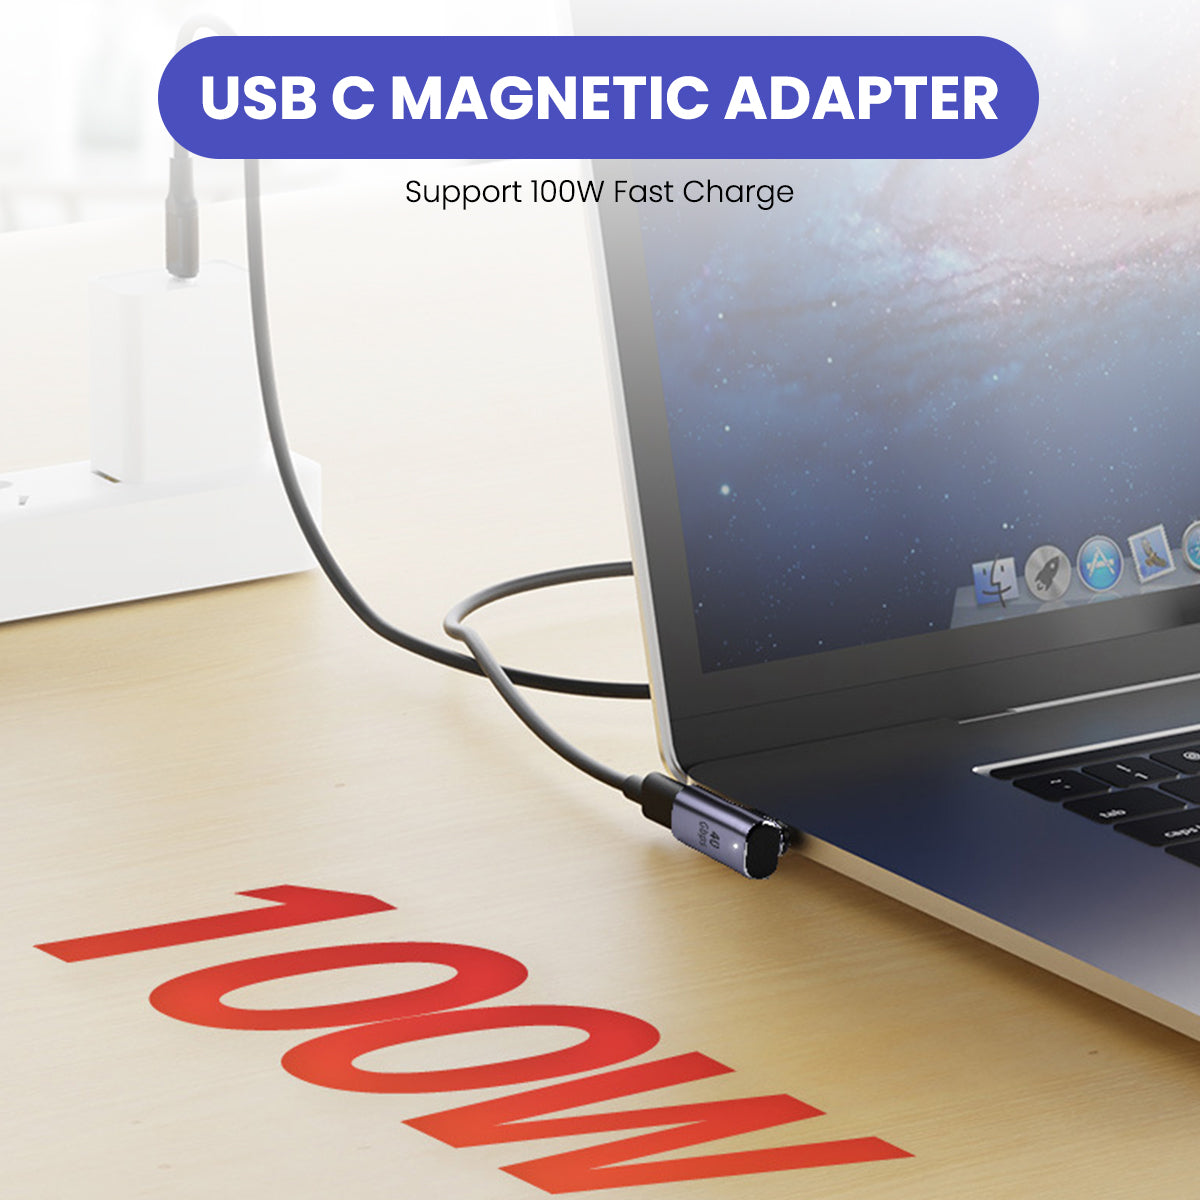 Verilux Type C Adapter Right Angle Magnetic 90 Degree USB C Adapter USB 4.0 Support Thunderbolt 3/4 100W PD Fast Charging 40Gb/s Data Transfer, 8K@60Hz Video Output for MacBook Pro/Air, USB C Devices